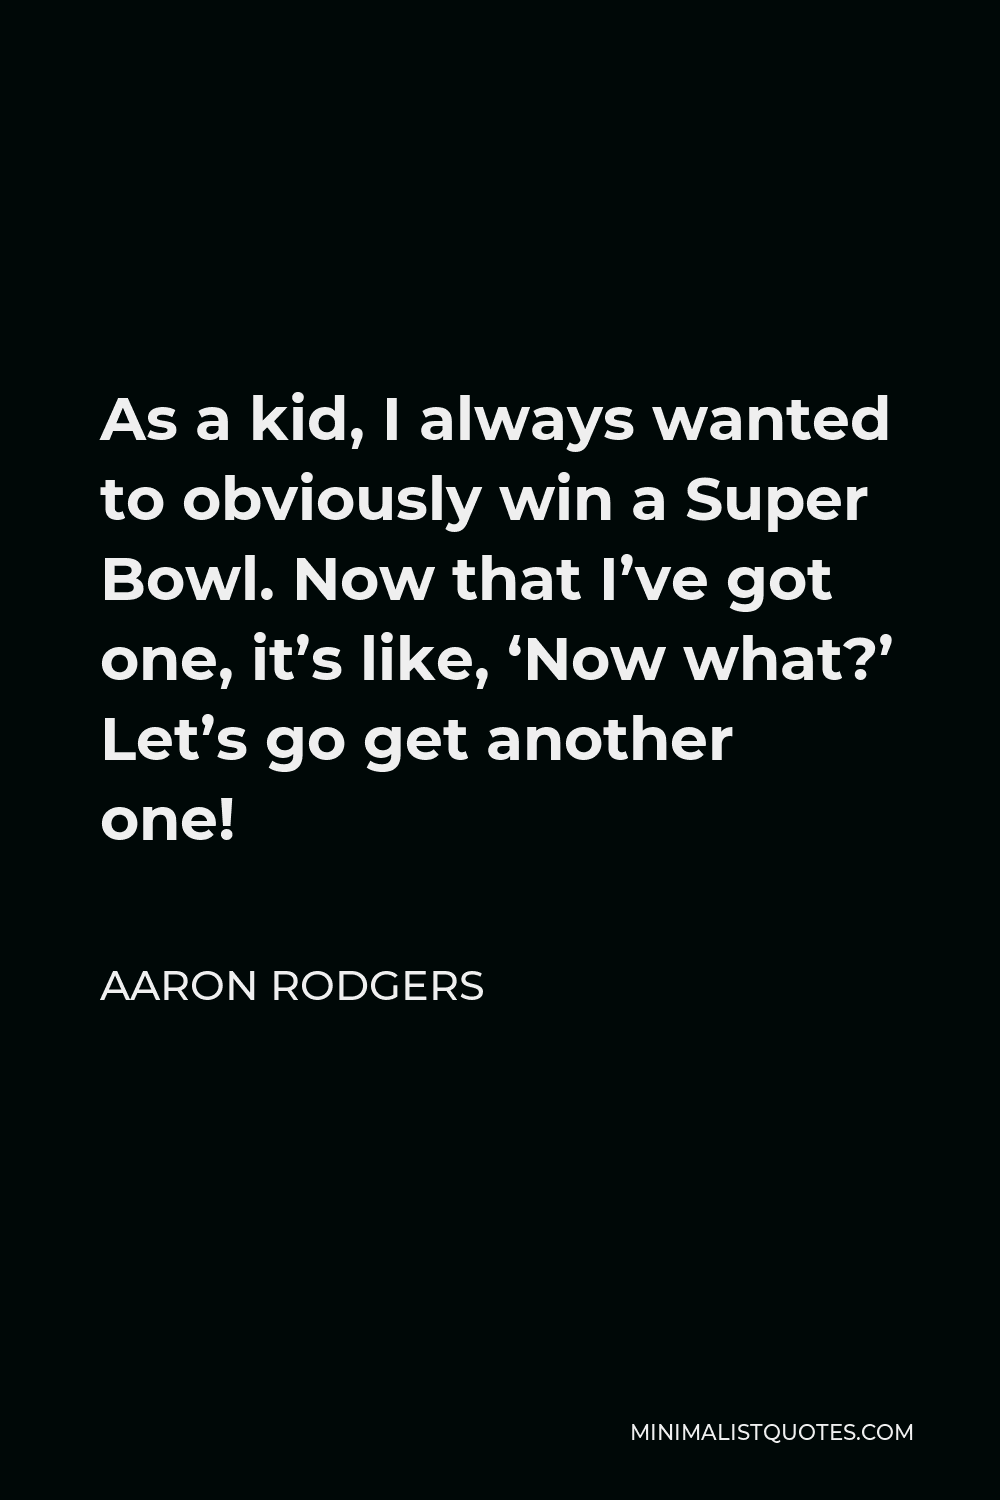 Aaron Rodgers Quote - As a kid, I always wanted to obviously win a Super Bowl. Now that I’ve got one, it’s like, ‘Now what?’ Let’s go get another one!